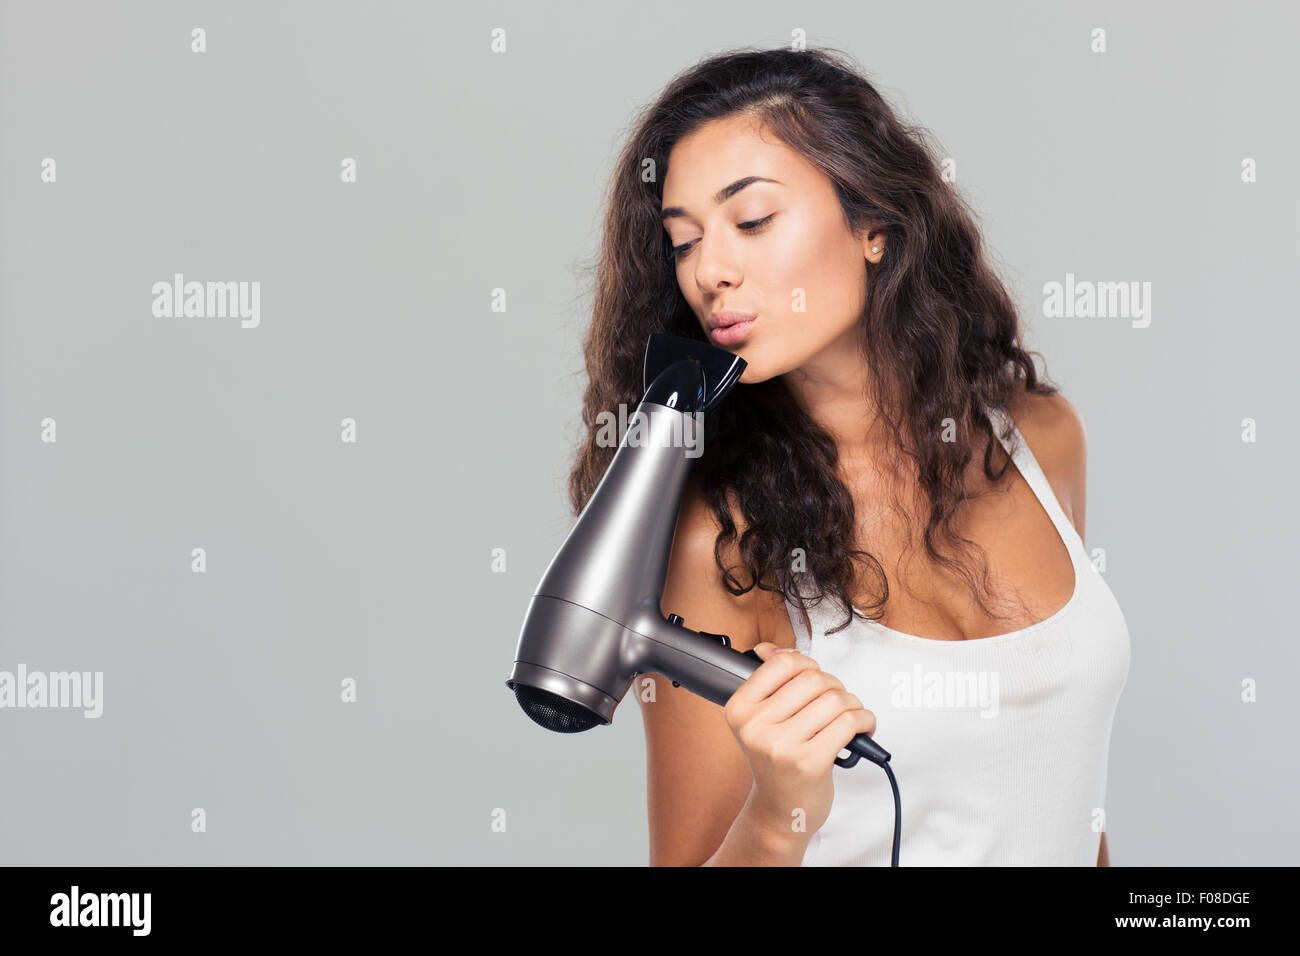 Portrait of a young pretty woman blowing on hairdryer over gray background Stock Photo